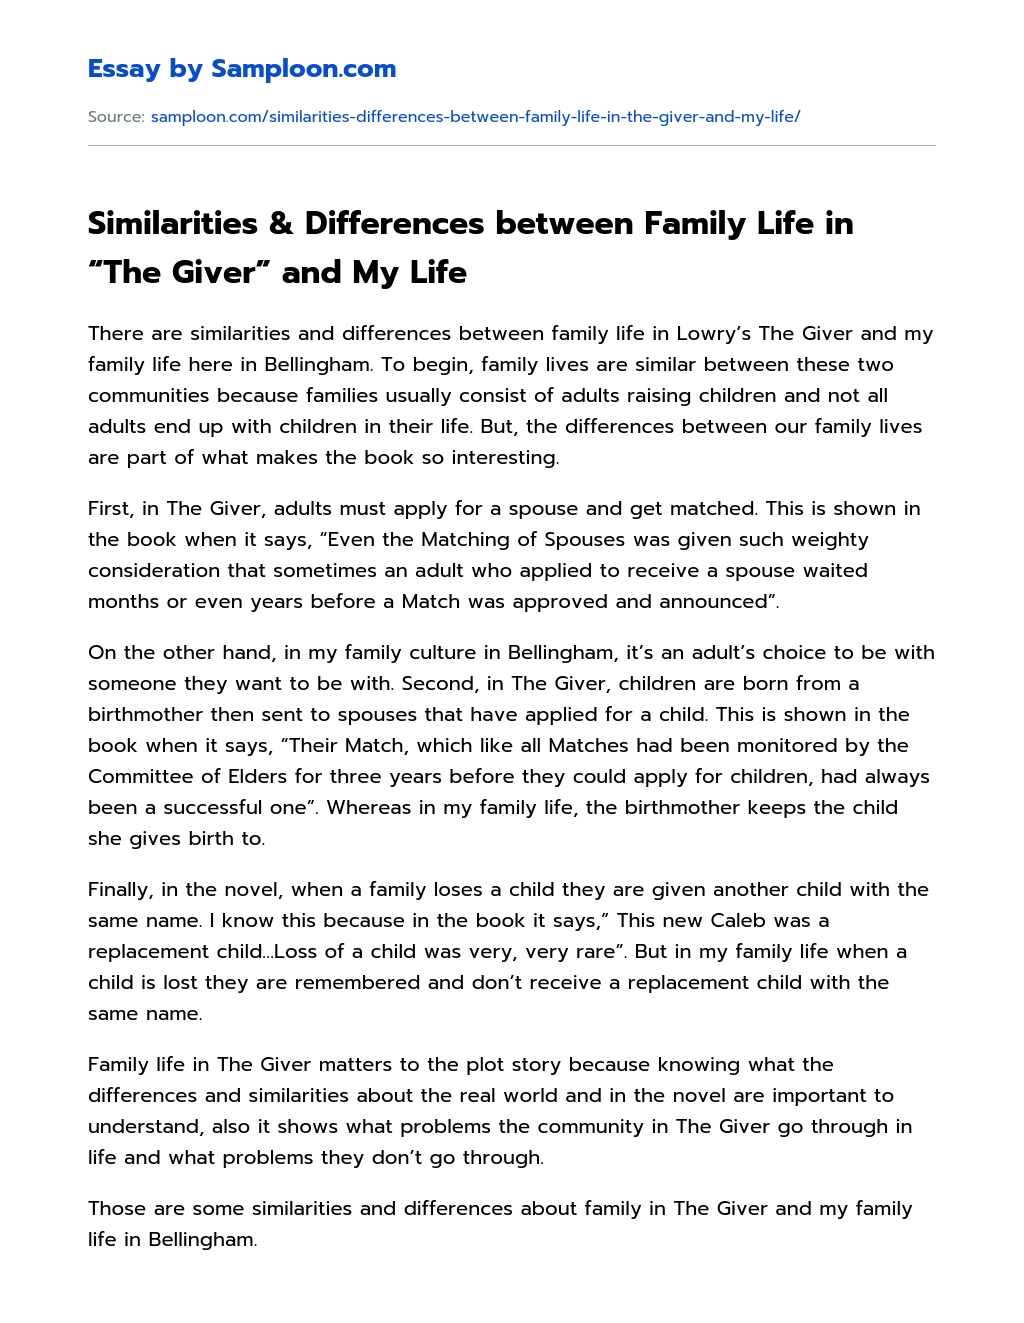 Similarities & Differences between Family Life in “The Giver” and My Life Compare And Contrast essay